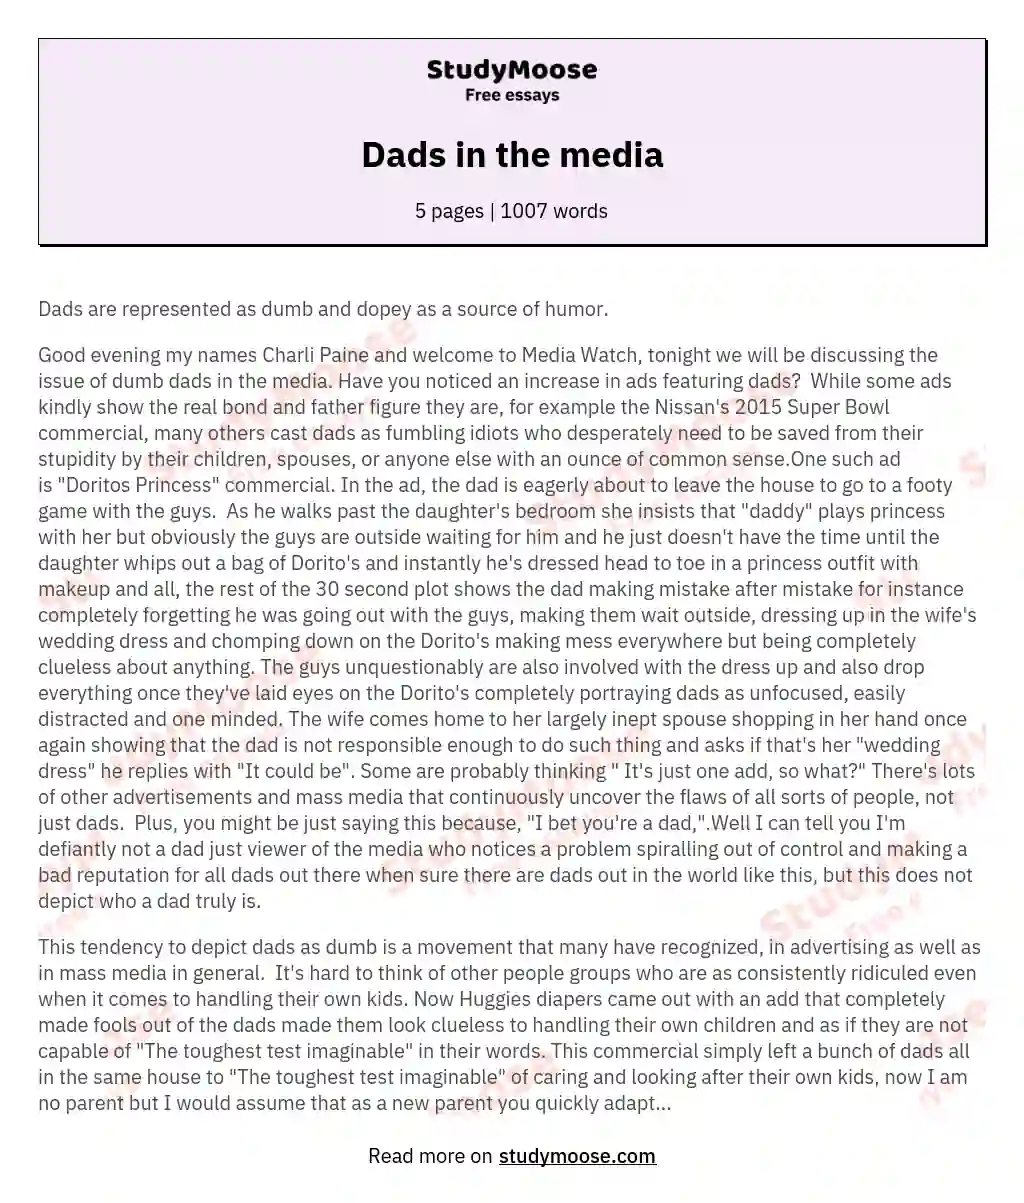 Dads in the media essay